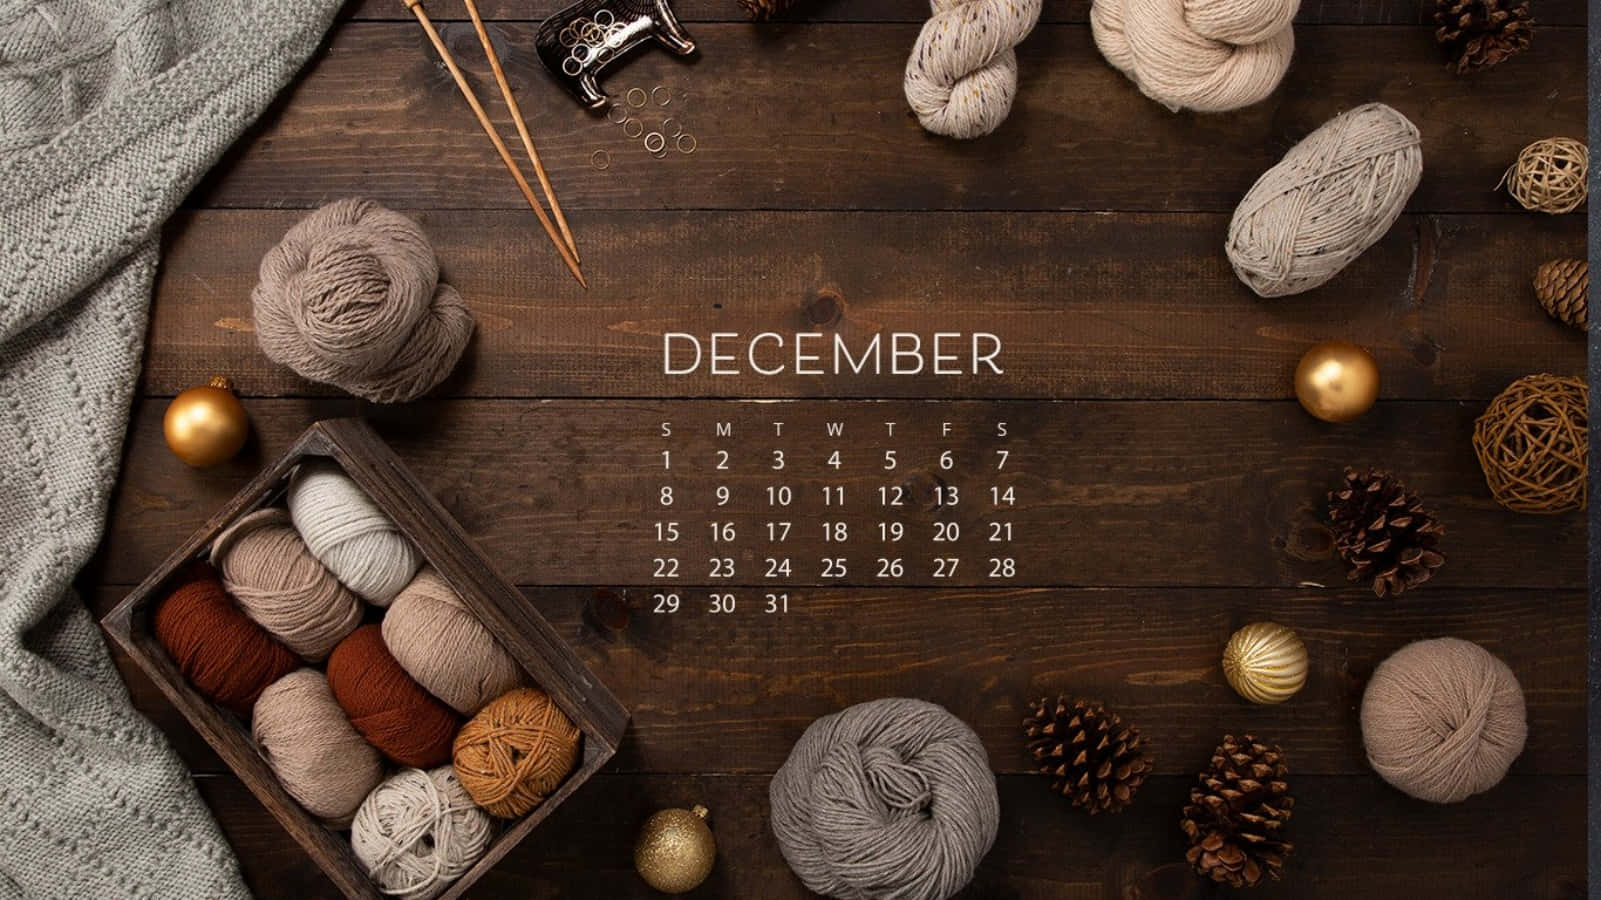 A Calendar With Knitting And Yarn On A Wooden Table